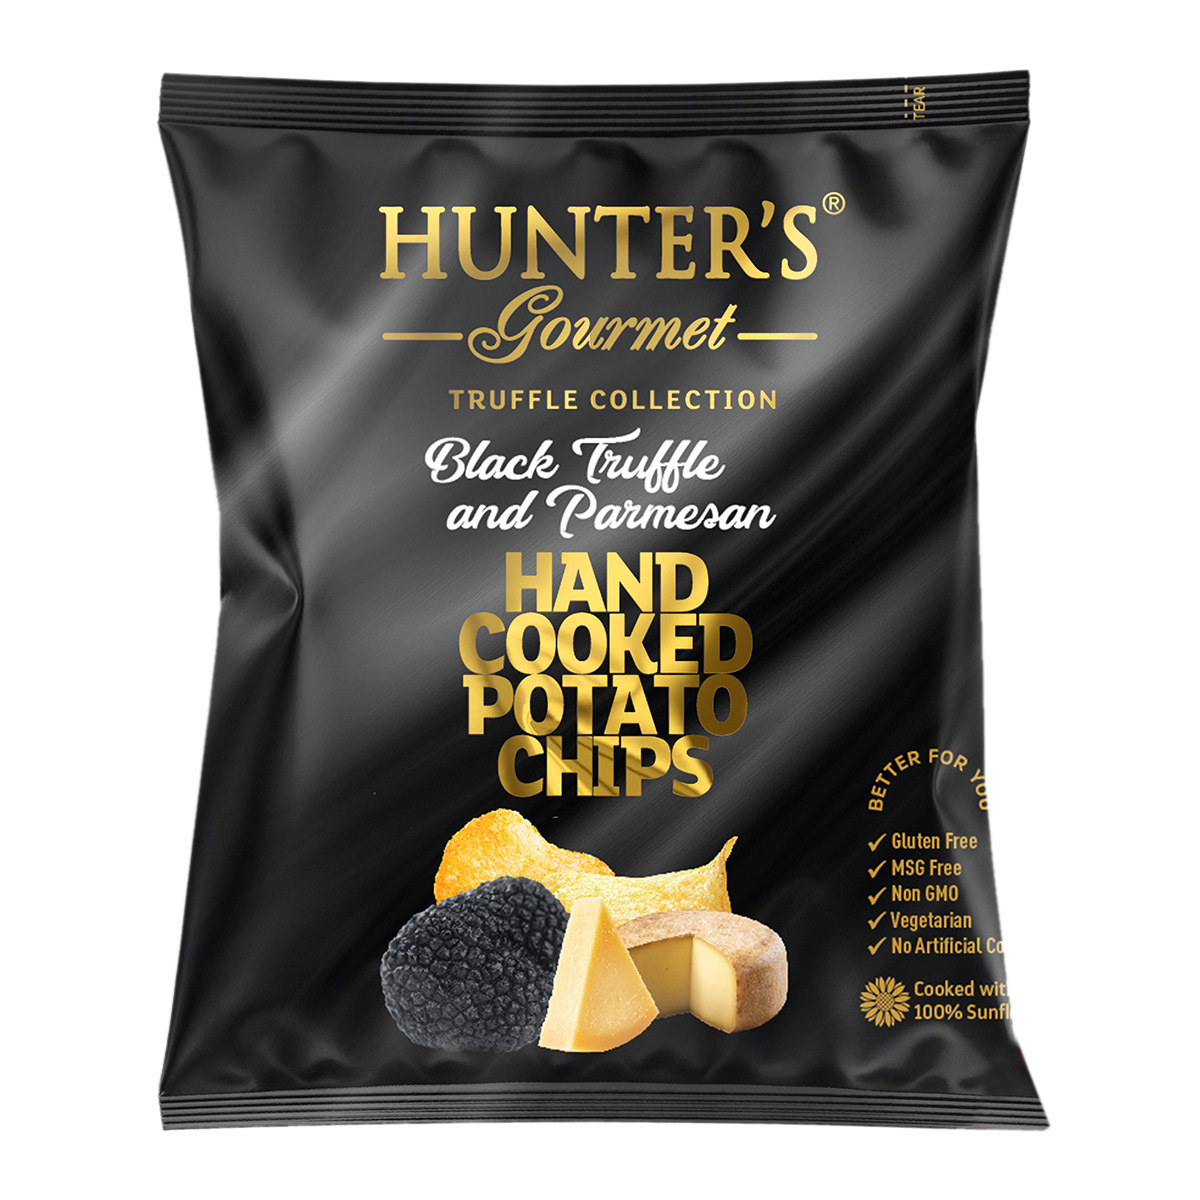 Hunter’s Gourmet Hand Cooked Potato Chips – White Truffle and Porcini – Truffle Collection (25gm)